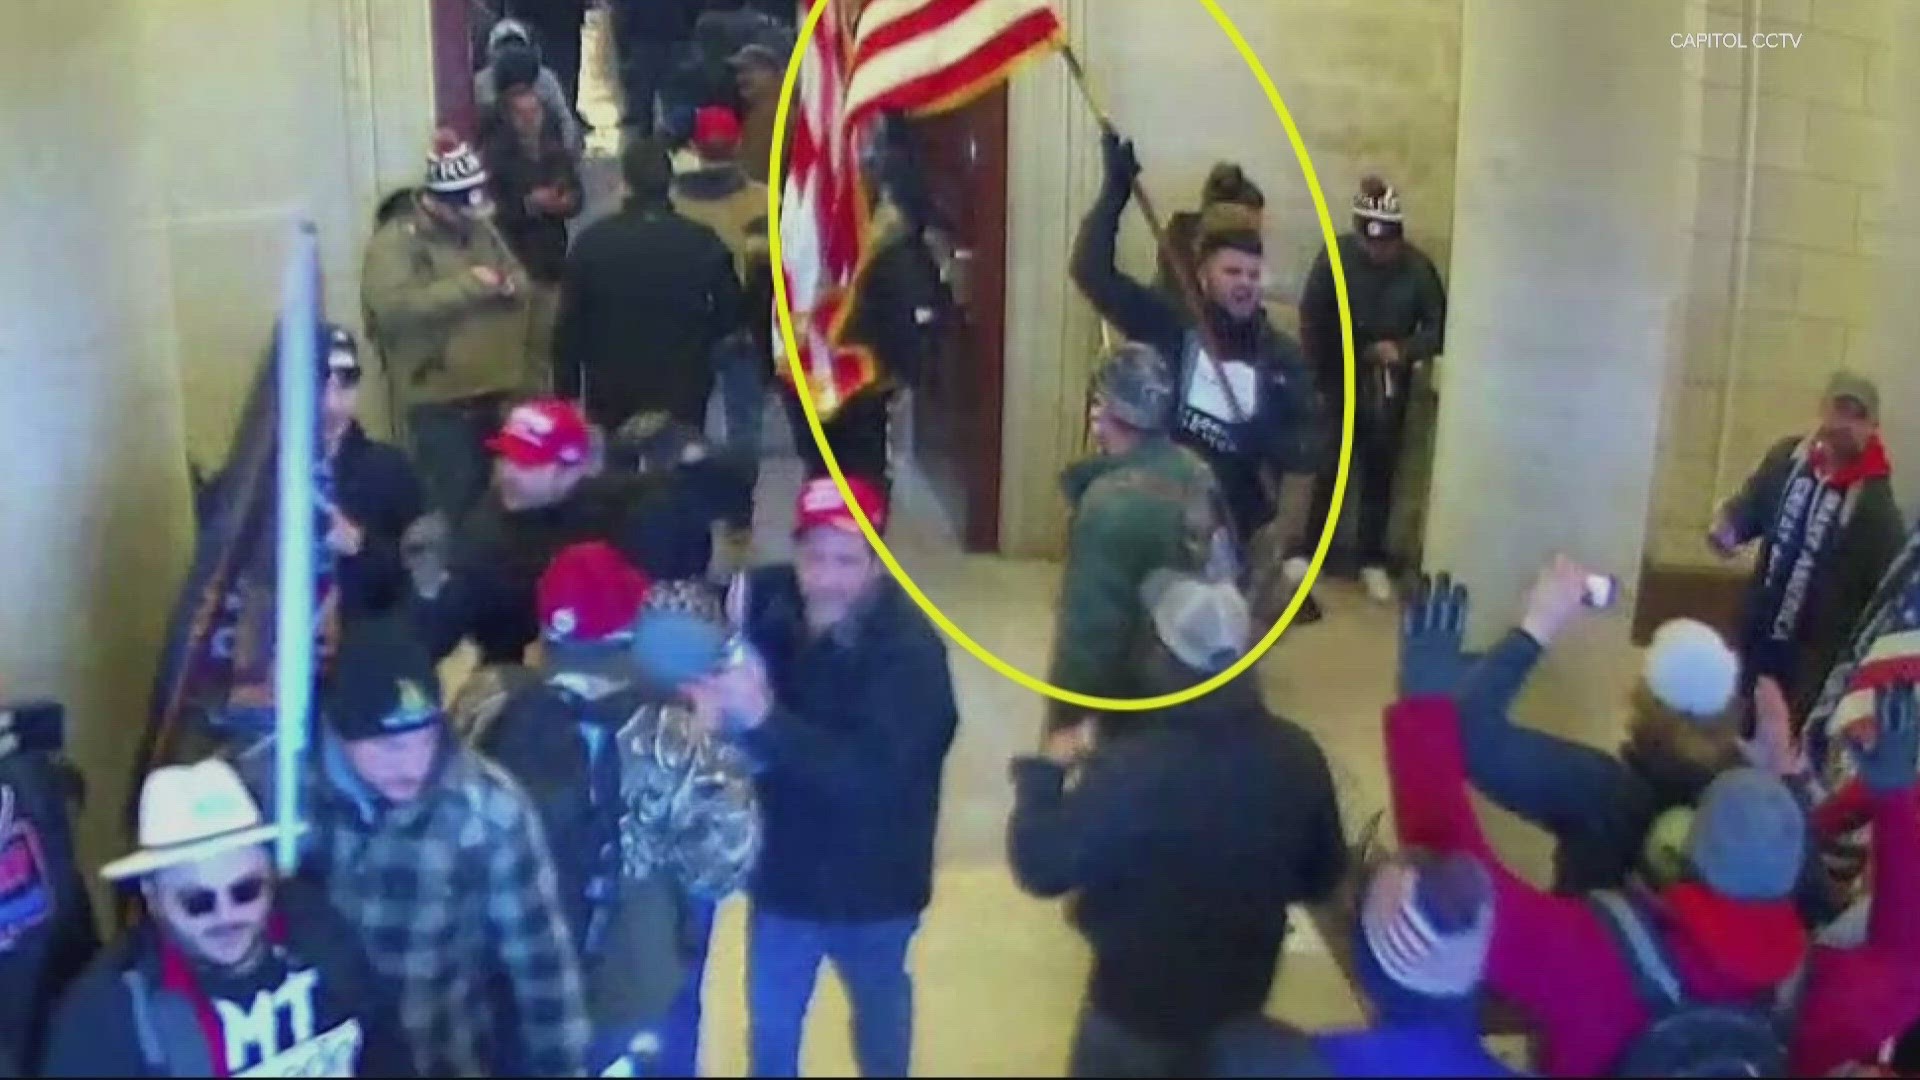 David Medina, 34, was arrested. Snapshots show him storming the Capitol and attempting to break the sign above the Rep. Nancy Pelosi's office.